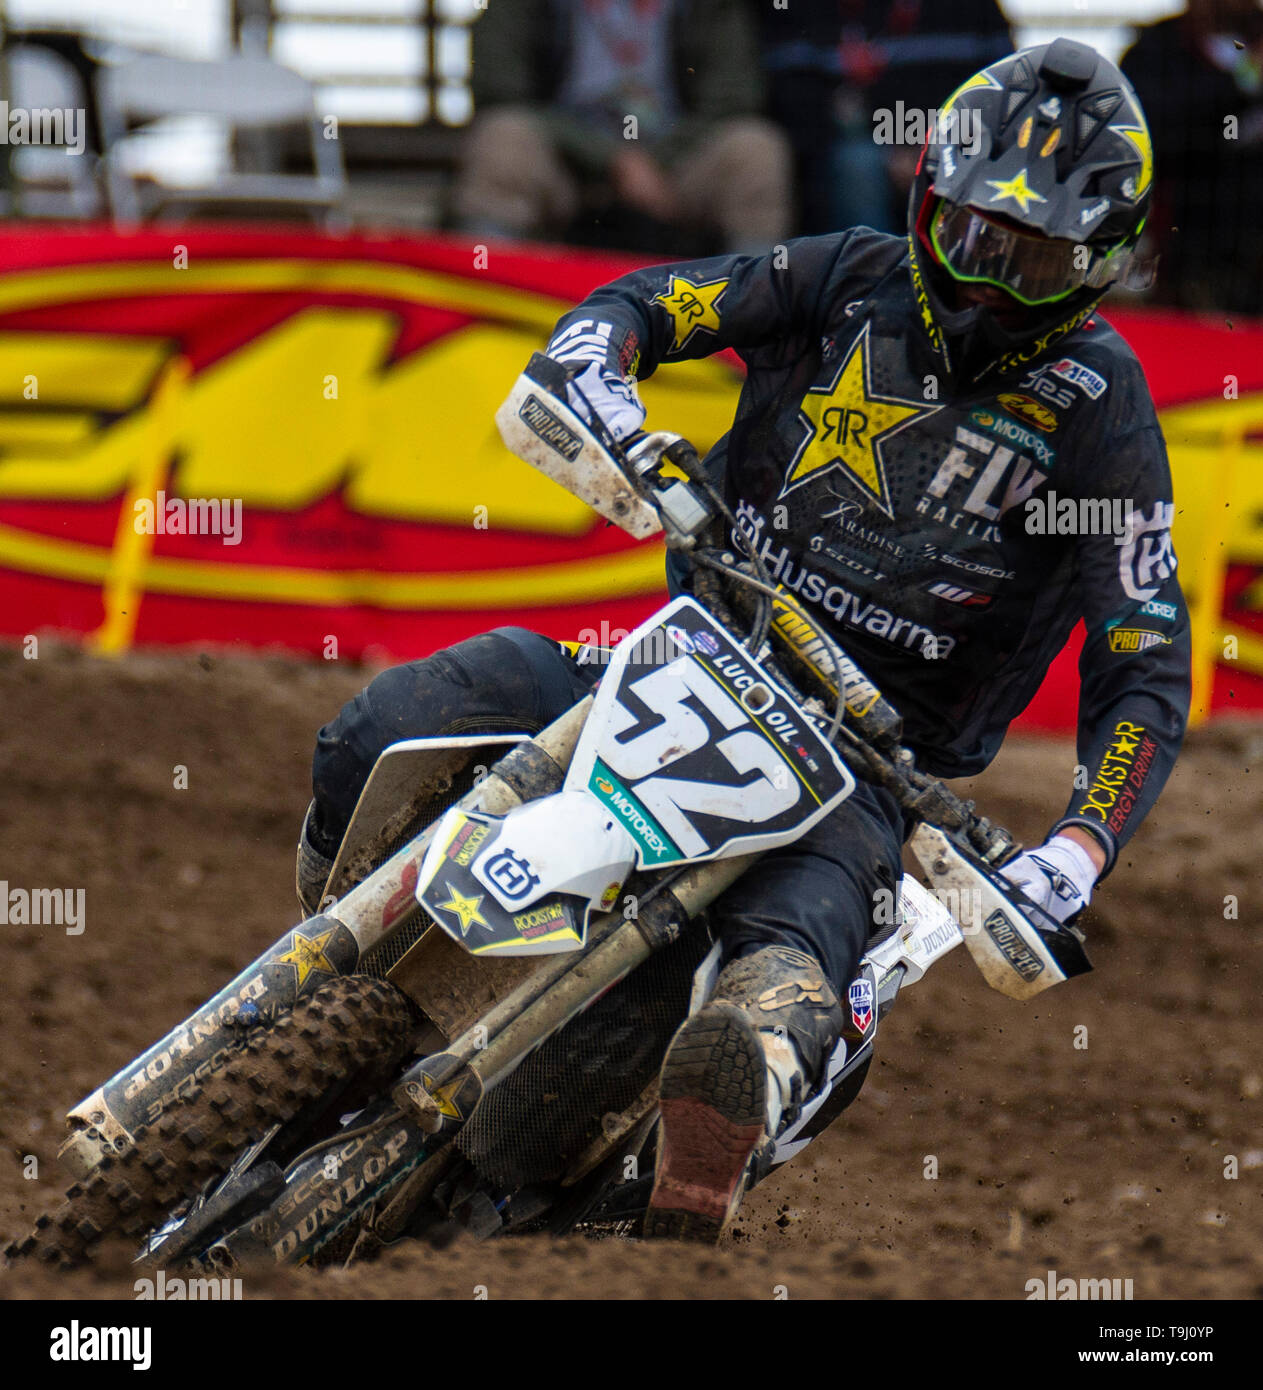 California, USA 18th May, 2019. A. : # 52 Jordan Bailey coming out of turn 8 during the Lucas Oil Pro Motocross Championship 250 class practice at Hangtown Motocross Classic Rancho Cordova, CA Thurman James/CSM/Alamy Live News Stock Photo